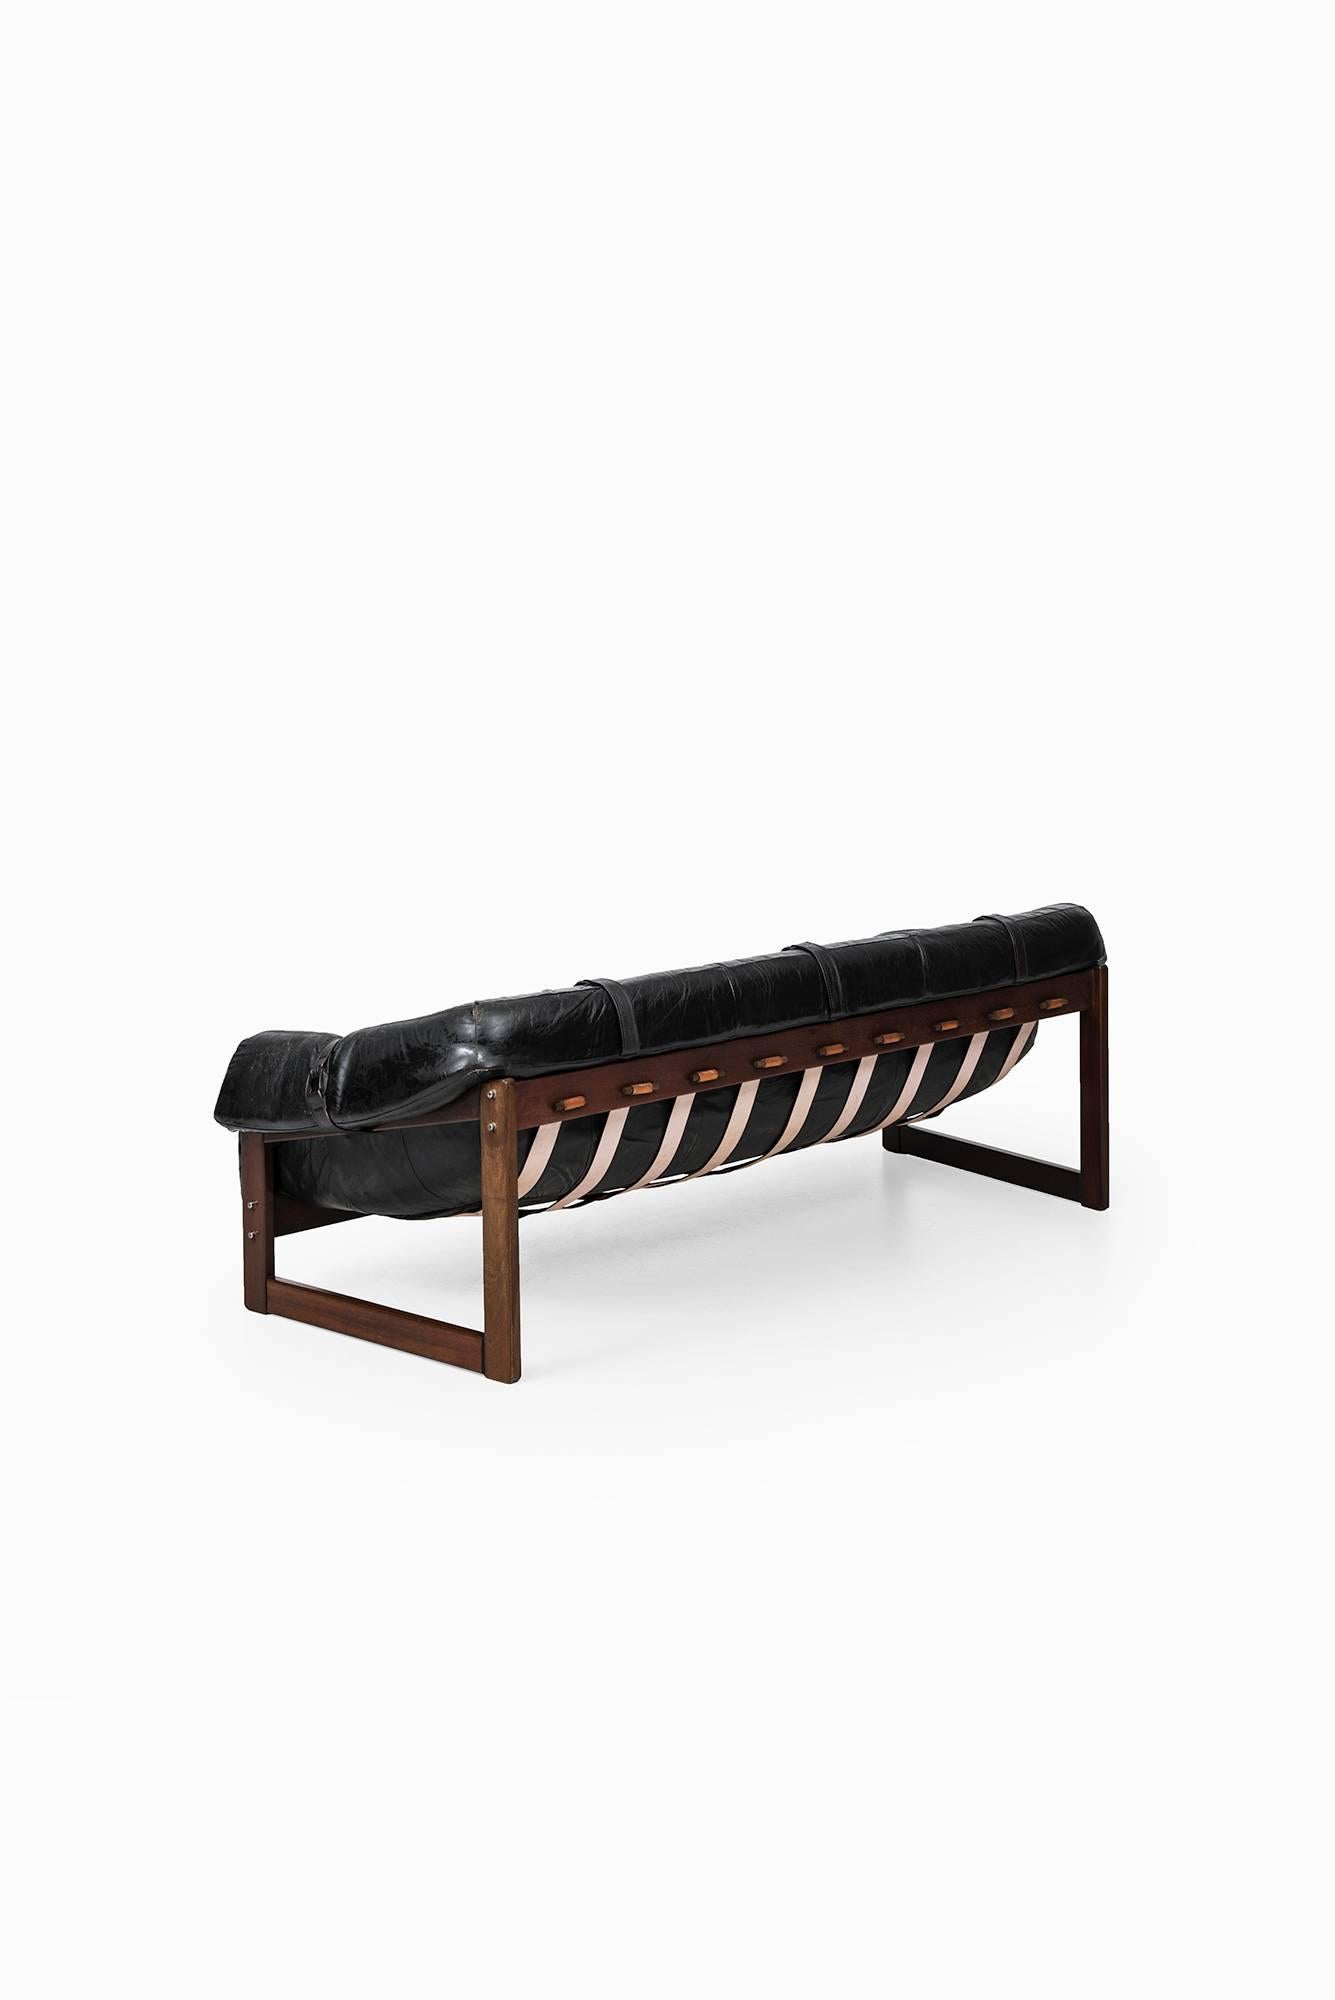 Percival Lafer Three-Seat Sofa in Black Leather by Lafer MP in Brazil 1